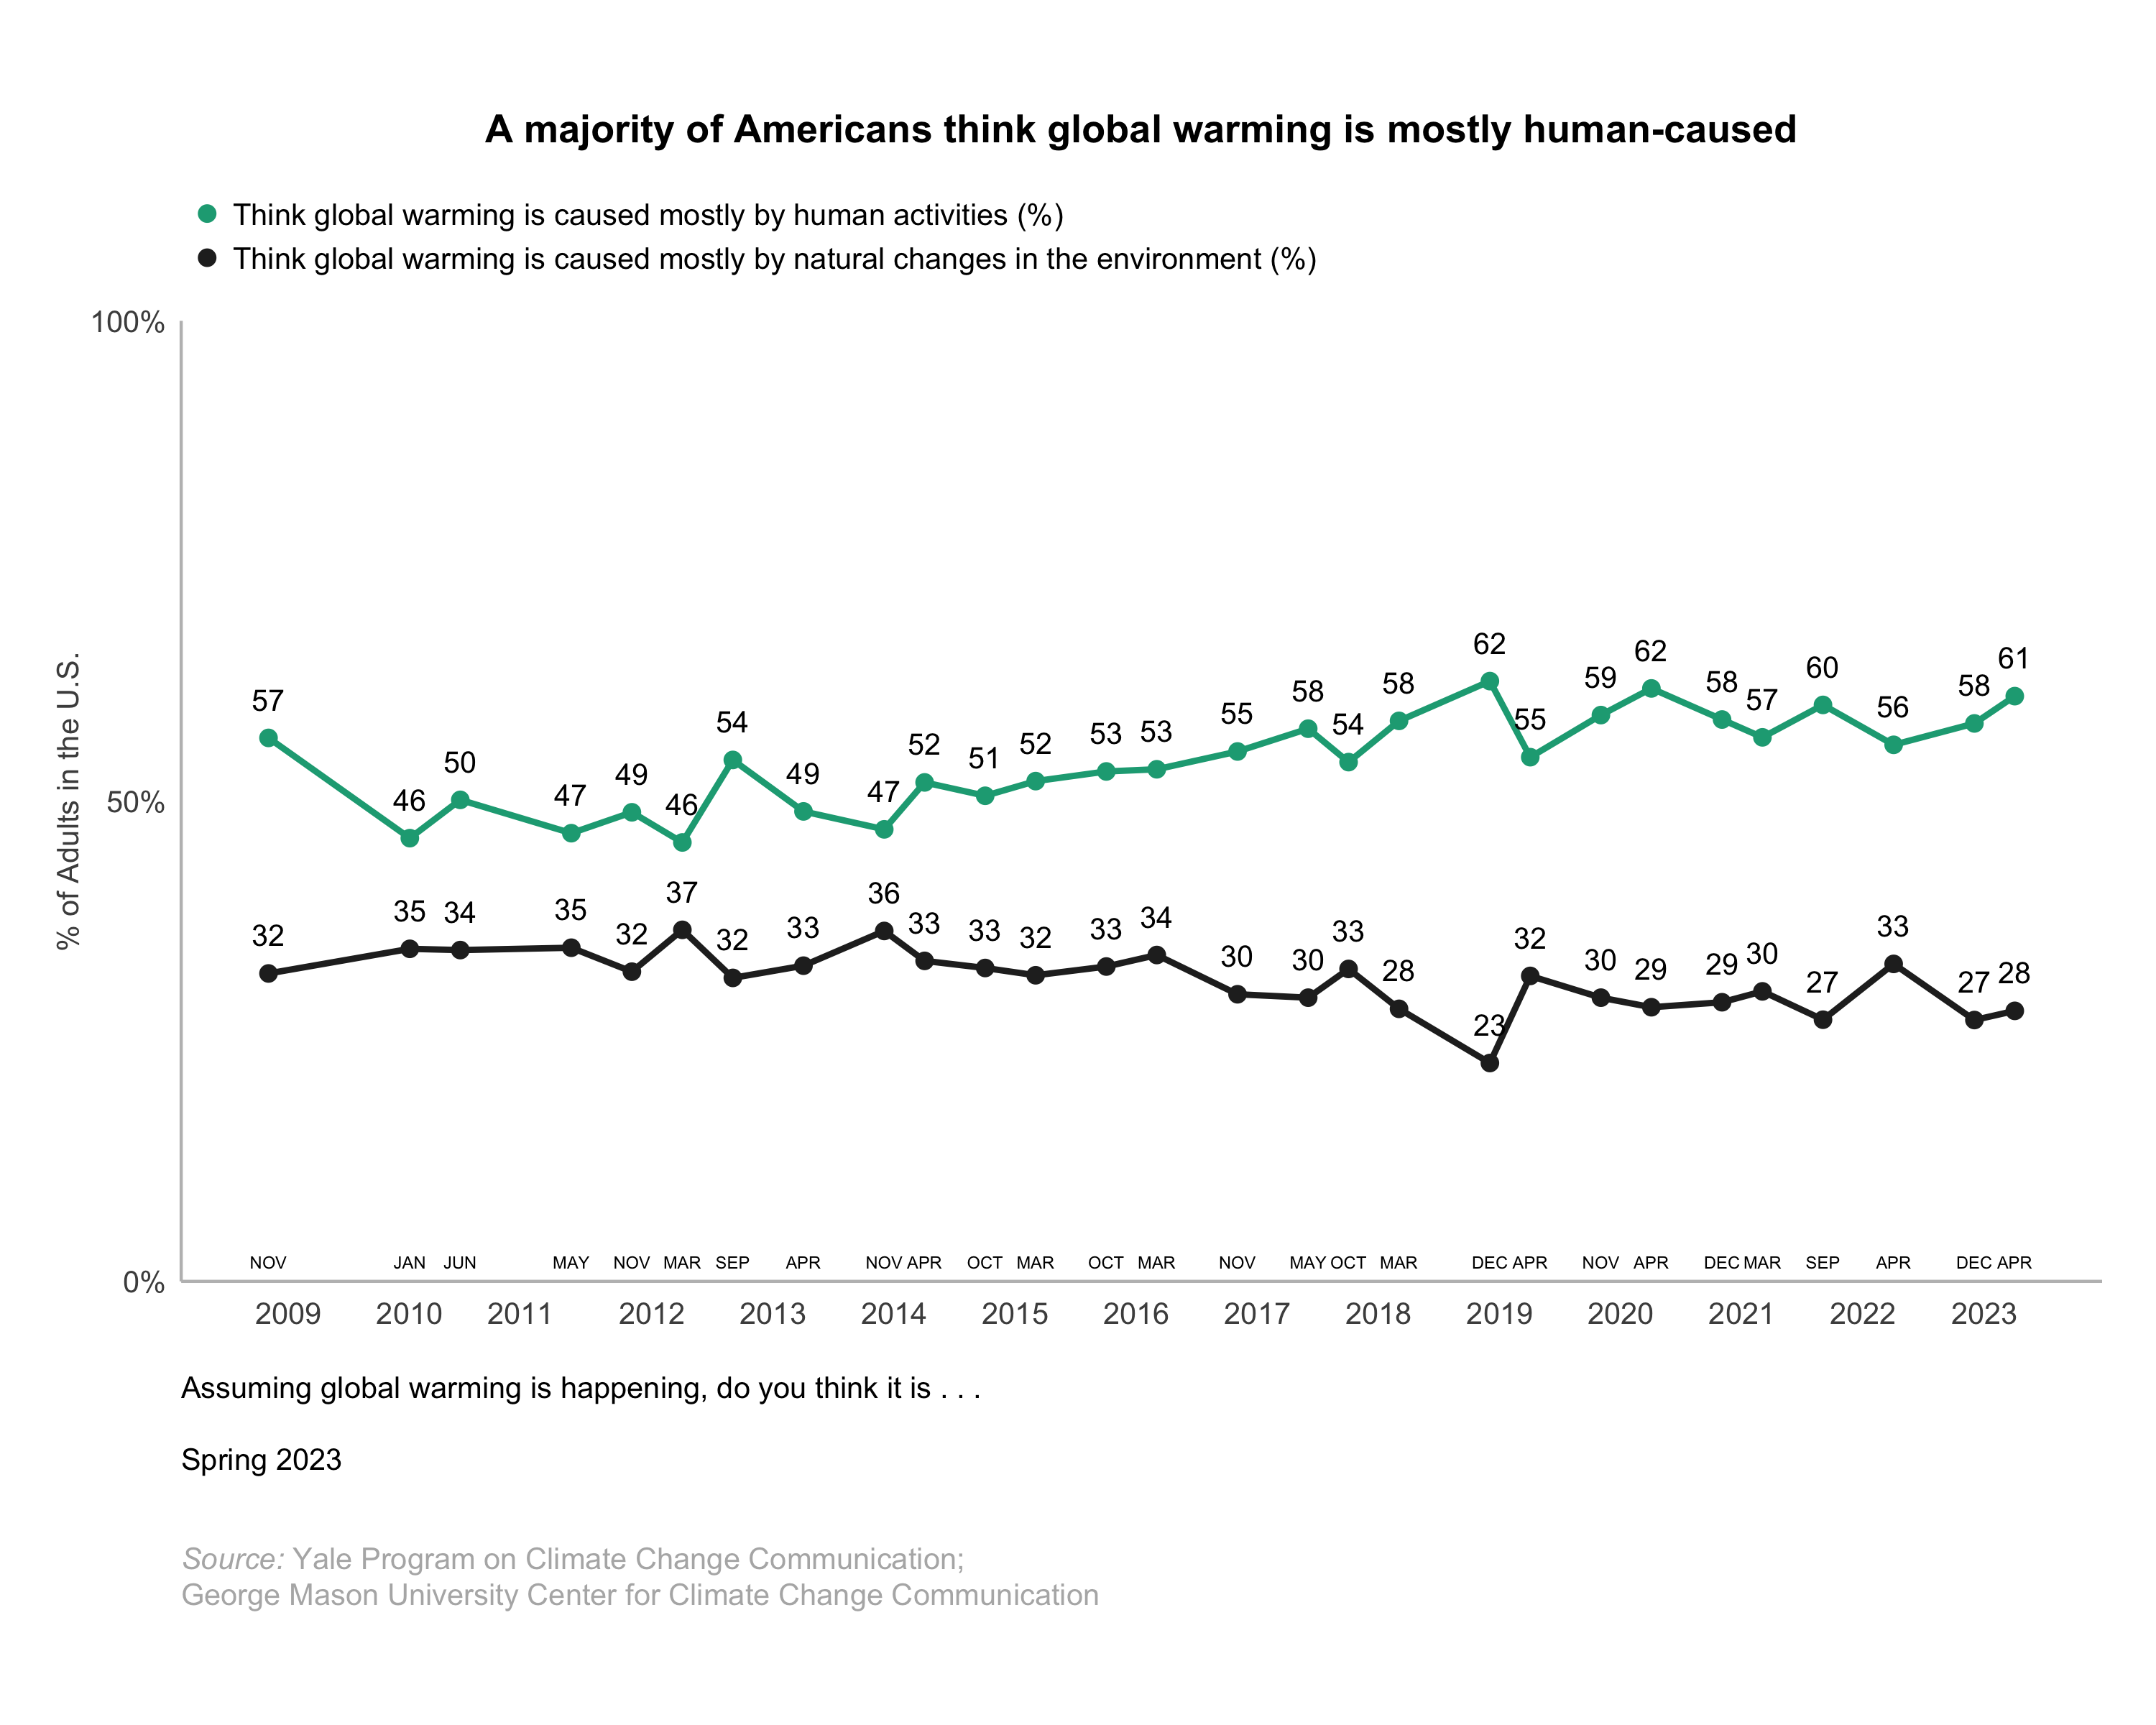 This line graph shows the percentage of Americans who think global warming is caused mostly by human activities or natural changes in the environment over time since 2008. A majority of Americans think global warming is mostly human-caused. Data: Climate Change in the American Mind, Spring 2023. Refer to the data tables in Appendix 1 of the report for all percentages.